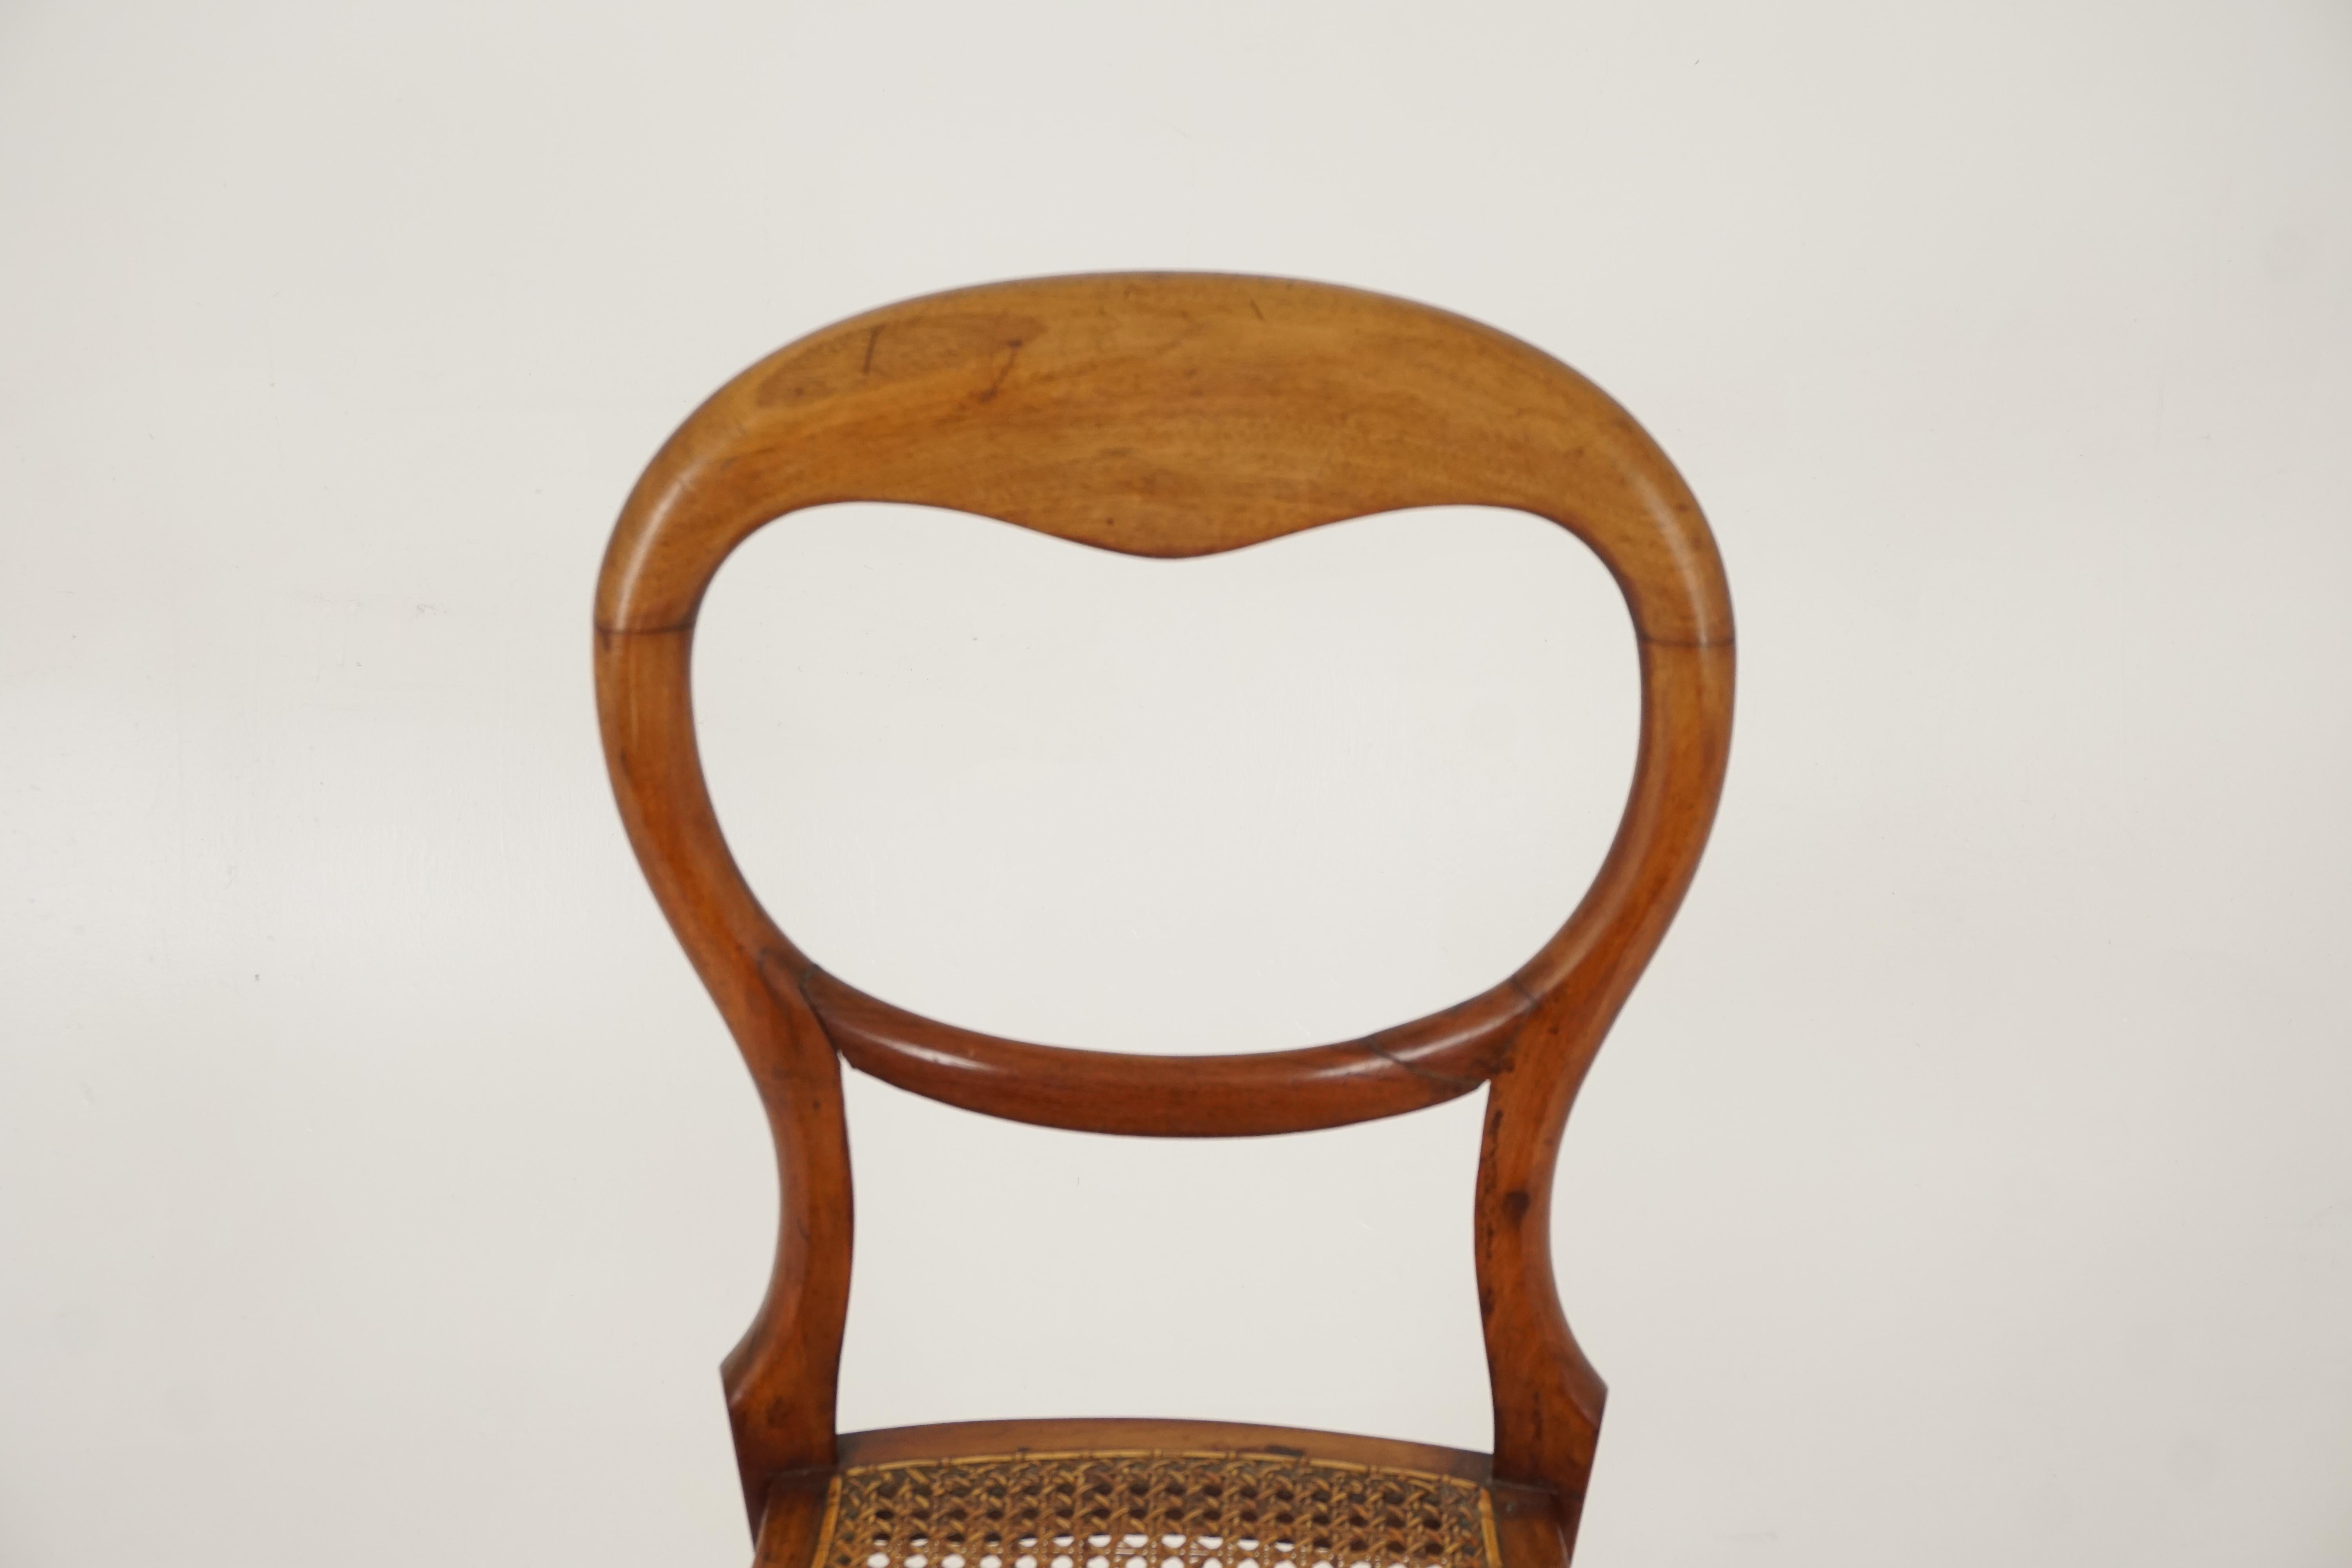 Hand-Crafted Antique Victorian Balloon Back Chair, Bedroom Chair, Scotland 1880, B2396A